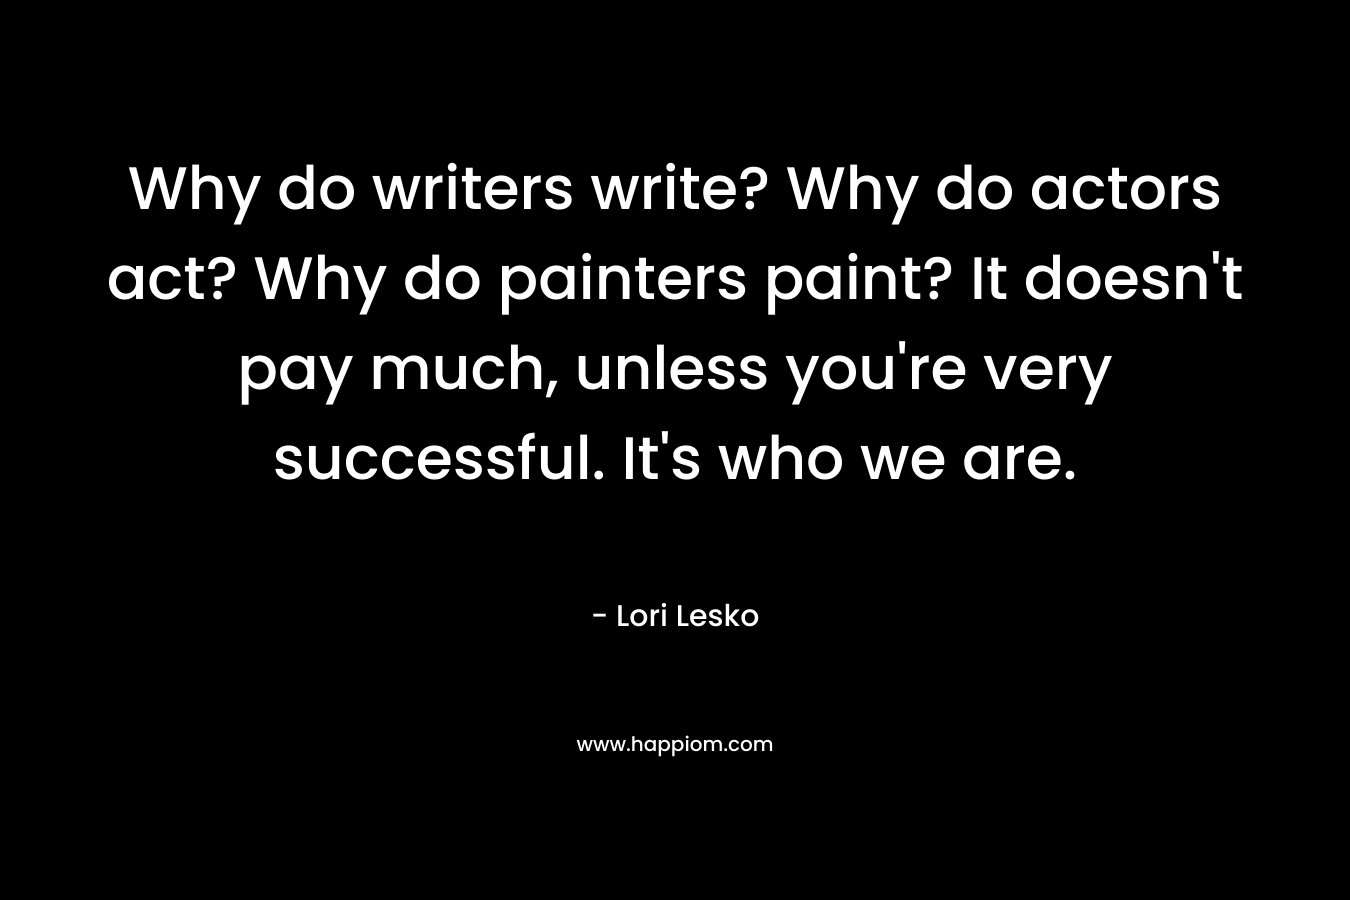 Why do writers write? Why do actors act? Why do painters paint? It doesn’t pay much, unless you’re very successful. It’s who we are. – Lori Lesko